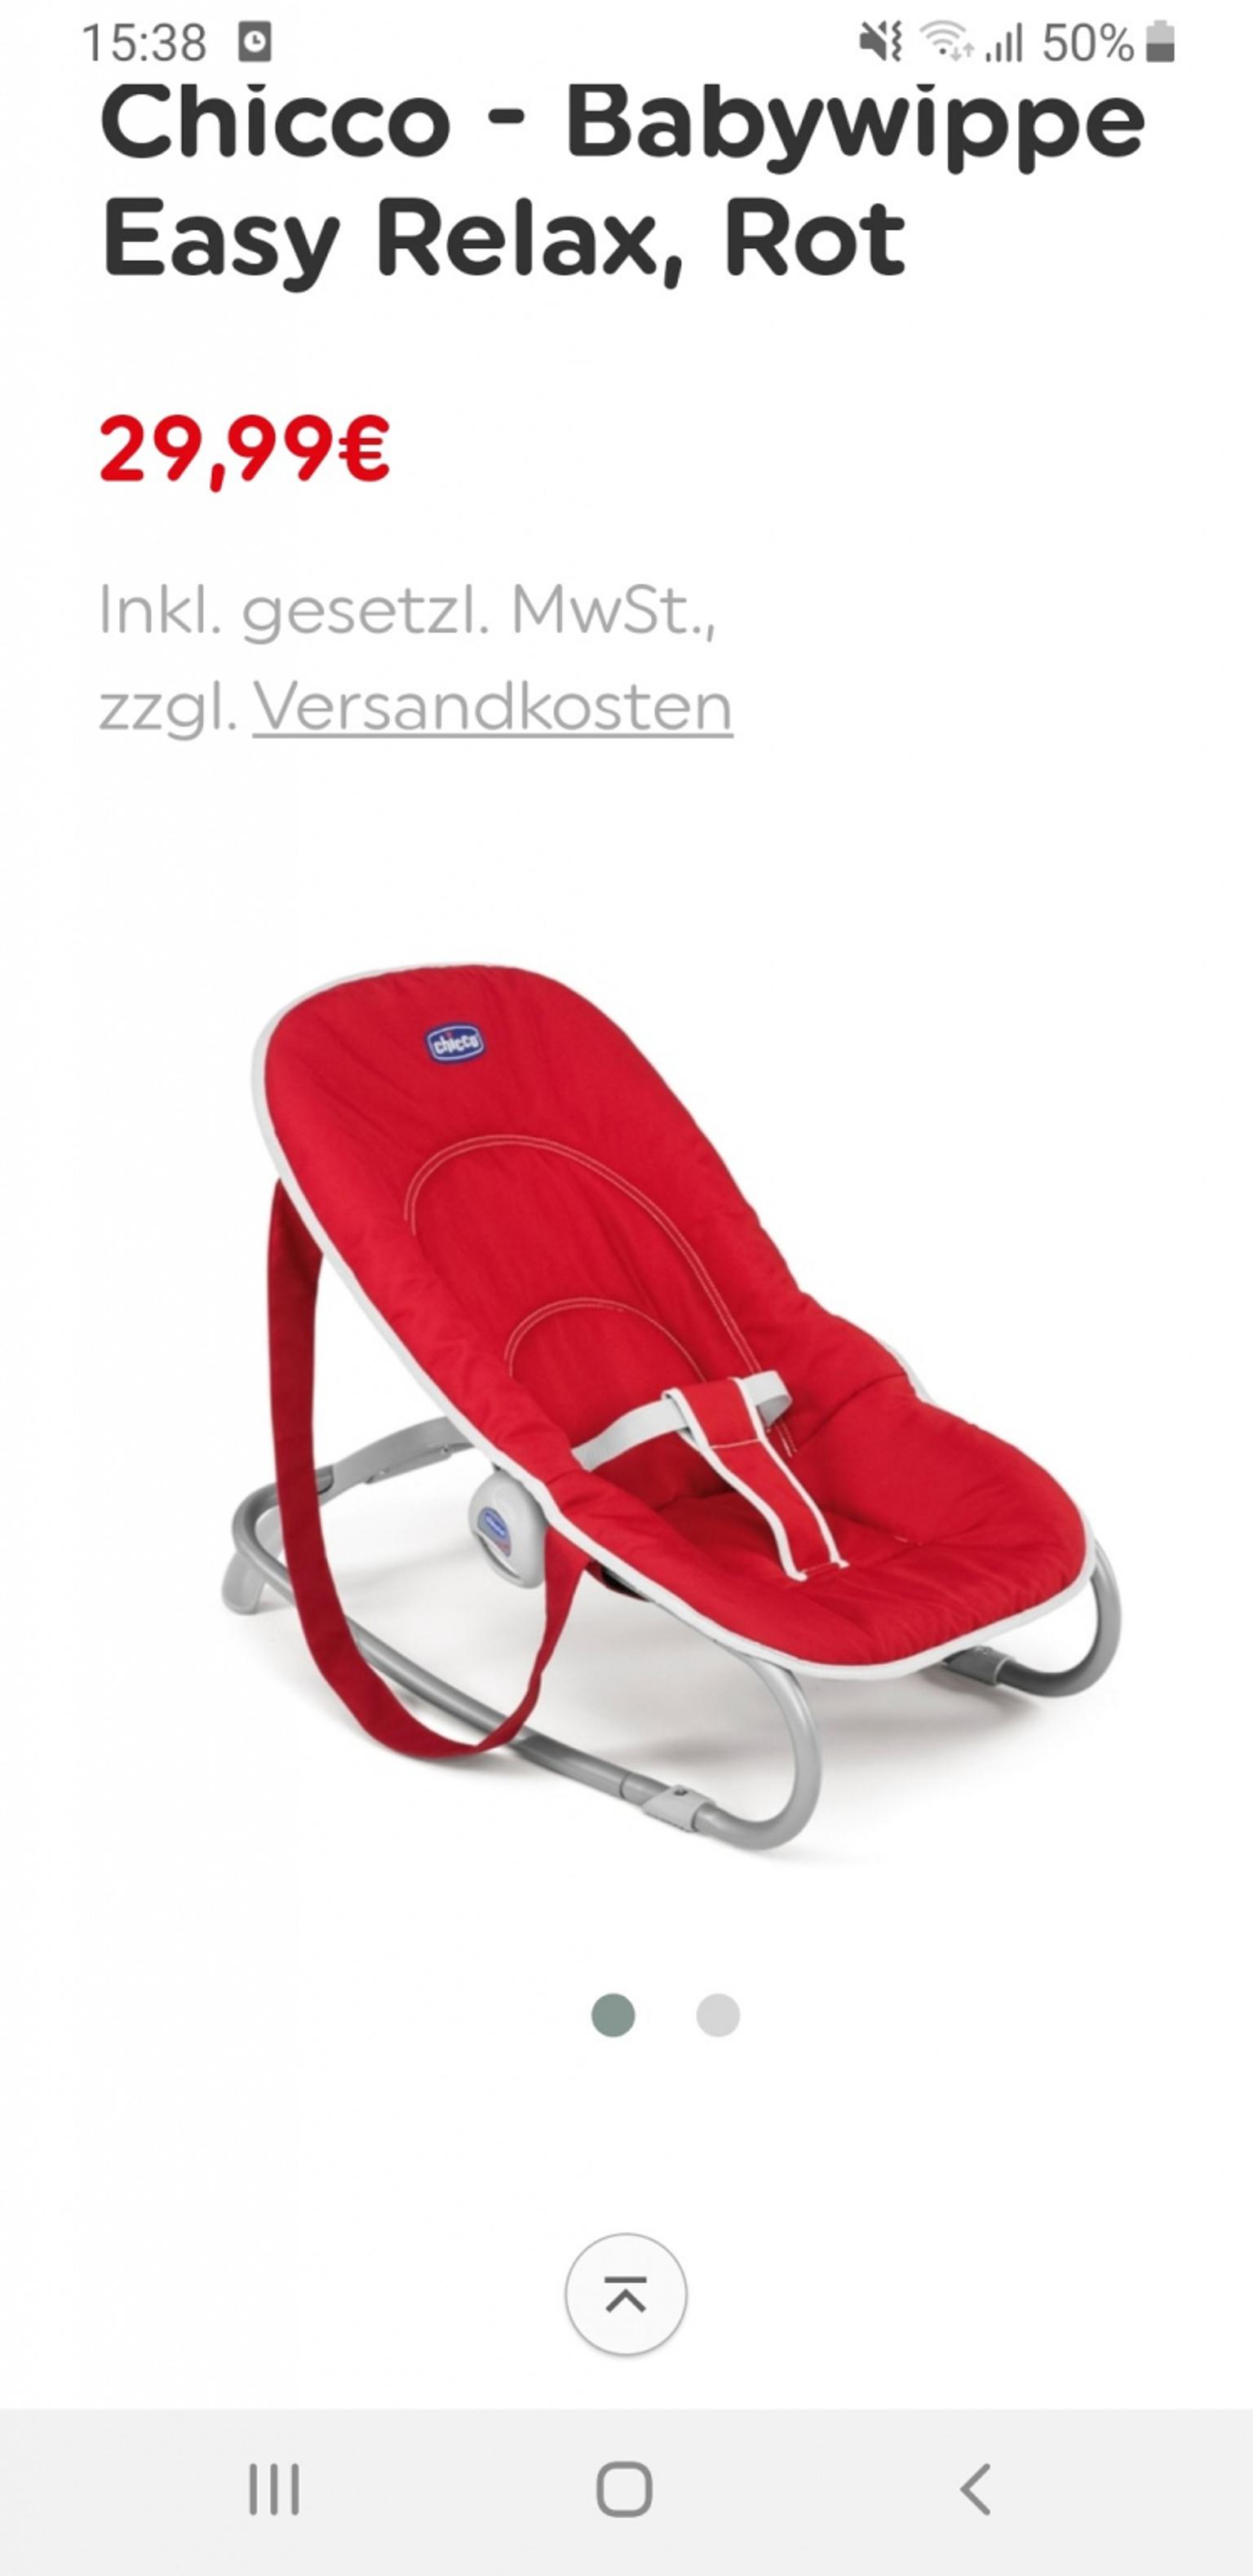 Chicco Chicco easy relax Schaukelwippe Top Zustand  